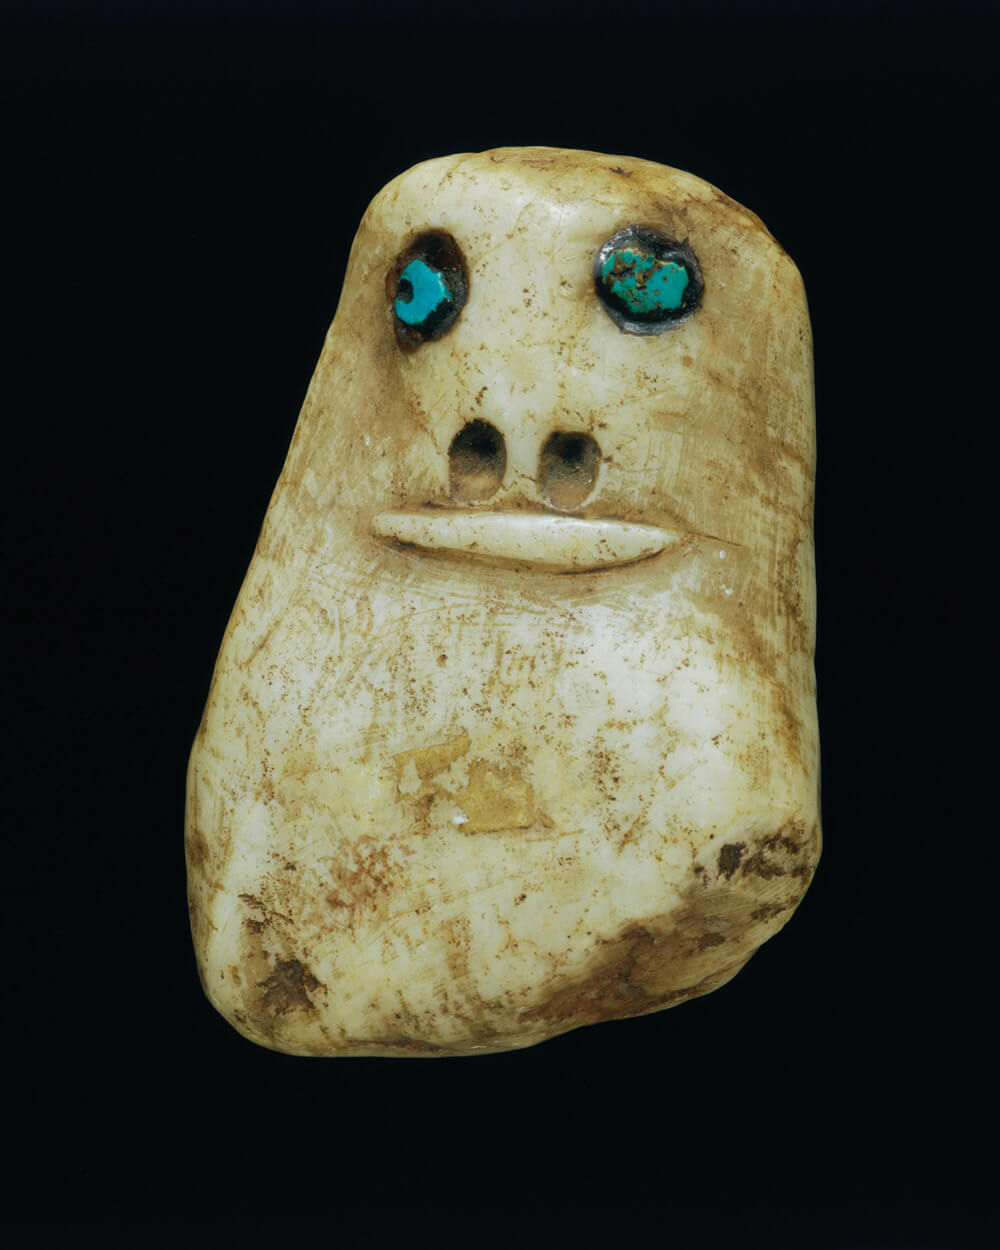 Native American figurine, Nambé Pueblo, New Mexico, date unknown. The object was donated to Harvard University’s Peabody Museum of Archaeology and Ethnology in 1909.